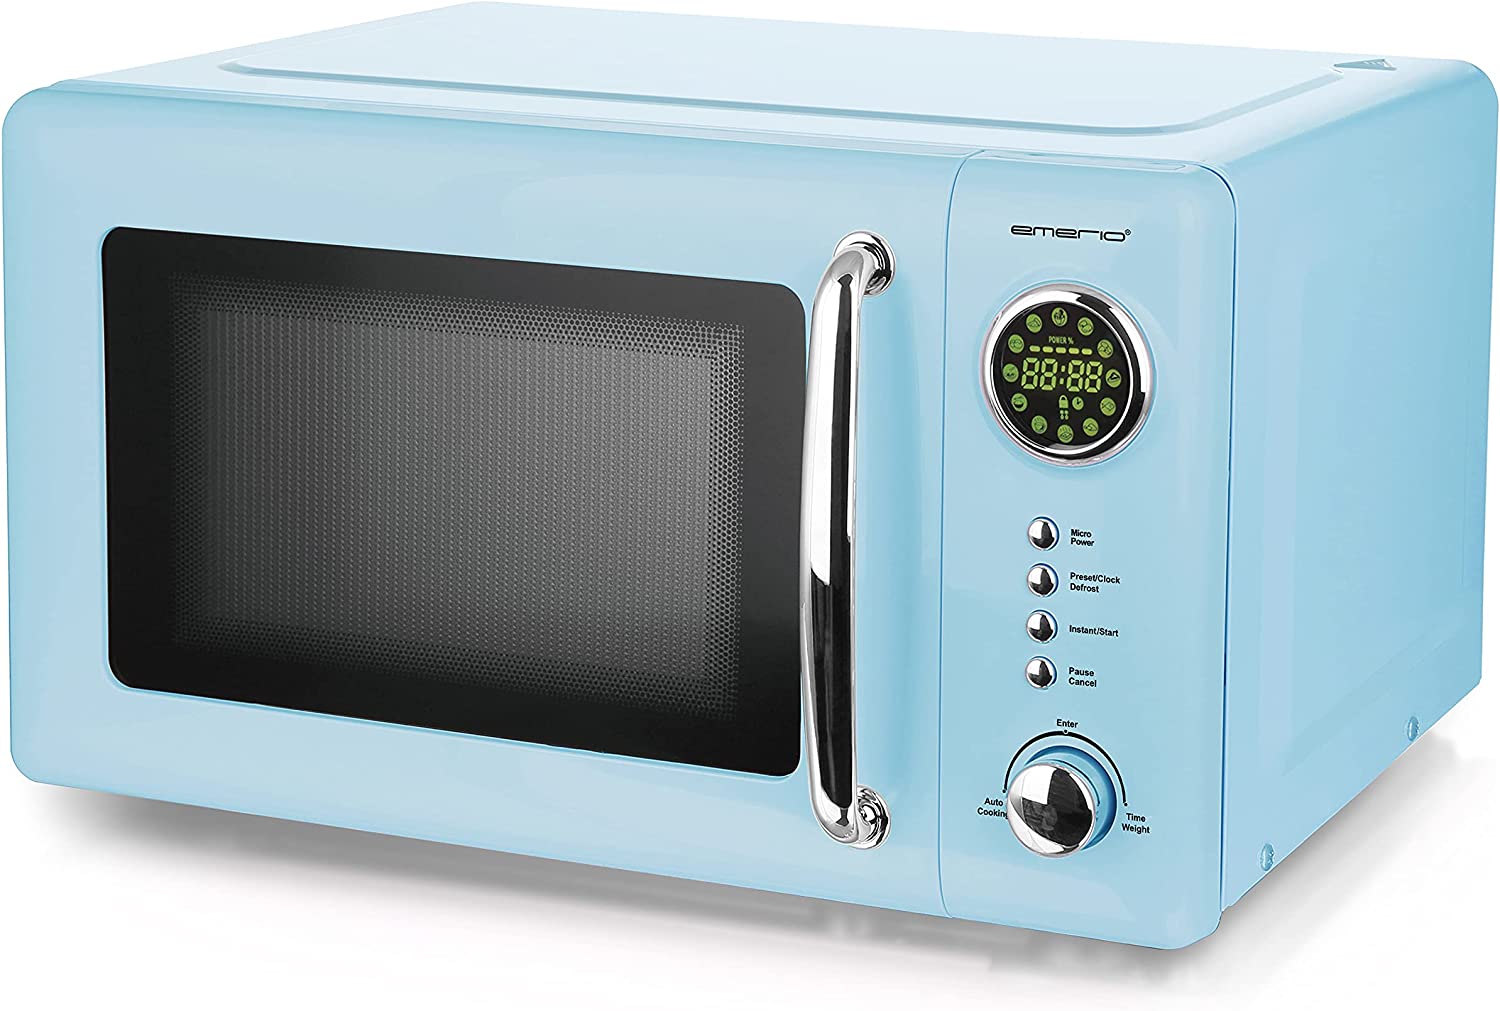 Emerio MW-112141.2 Microwave Oven 20 Litre Cooking Chamber Turntable Retro Design Baby Blue Microwave Device Light Blue